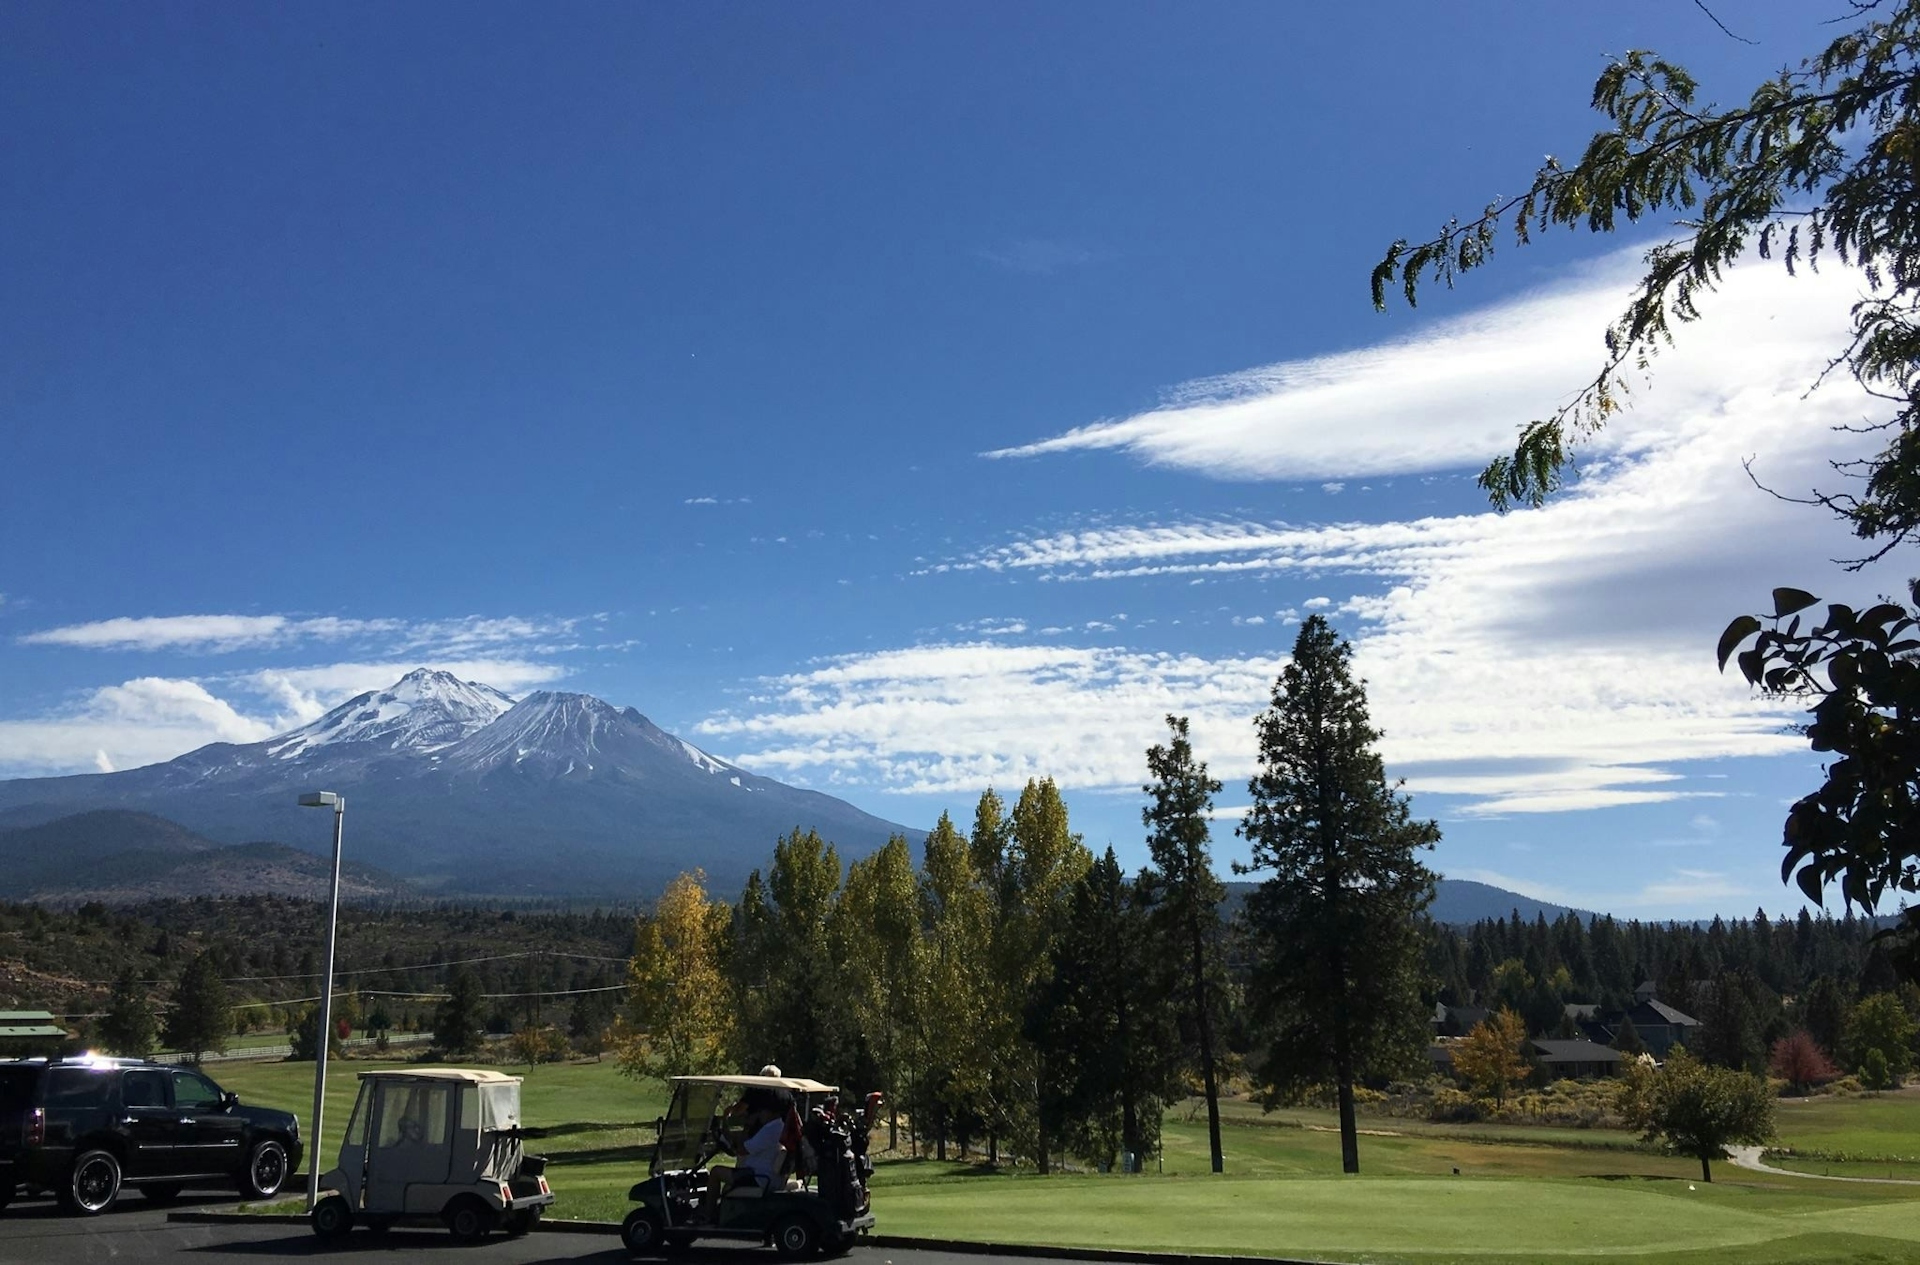 Mount Shasta is a gorgeous, volcanic peak in Northern California.